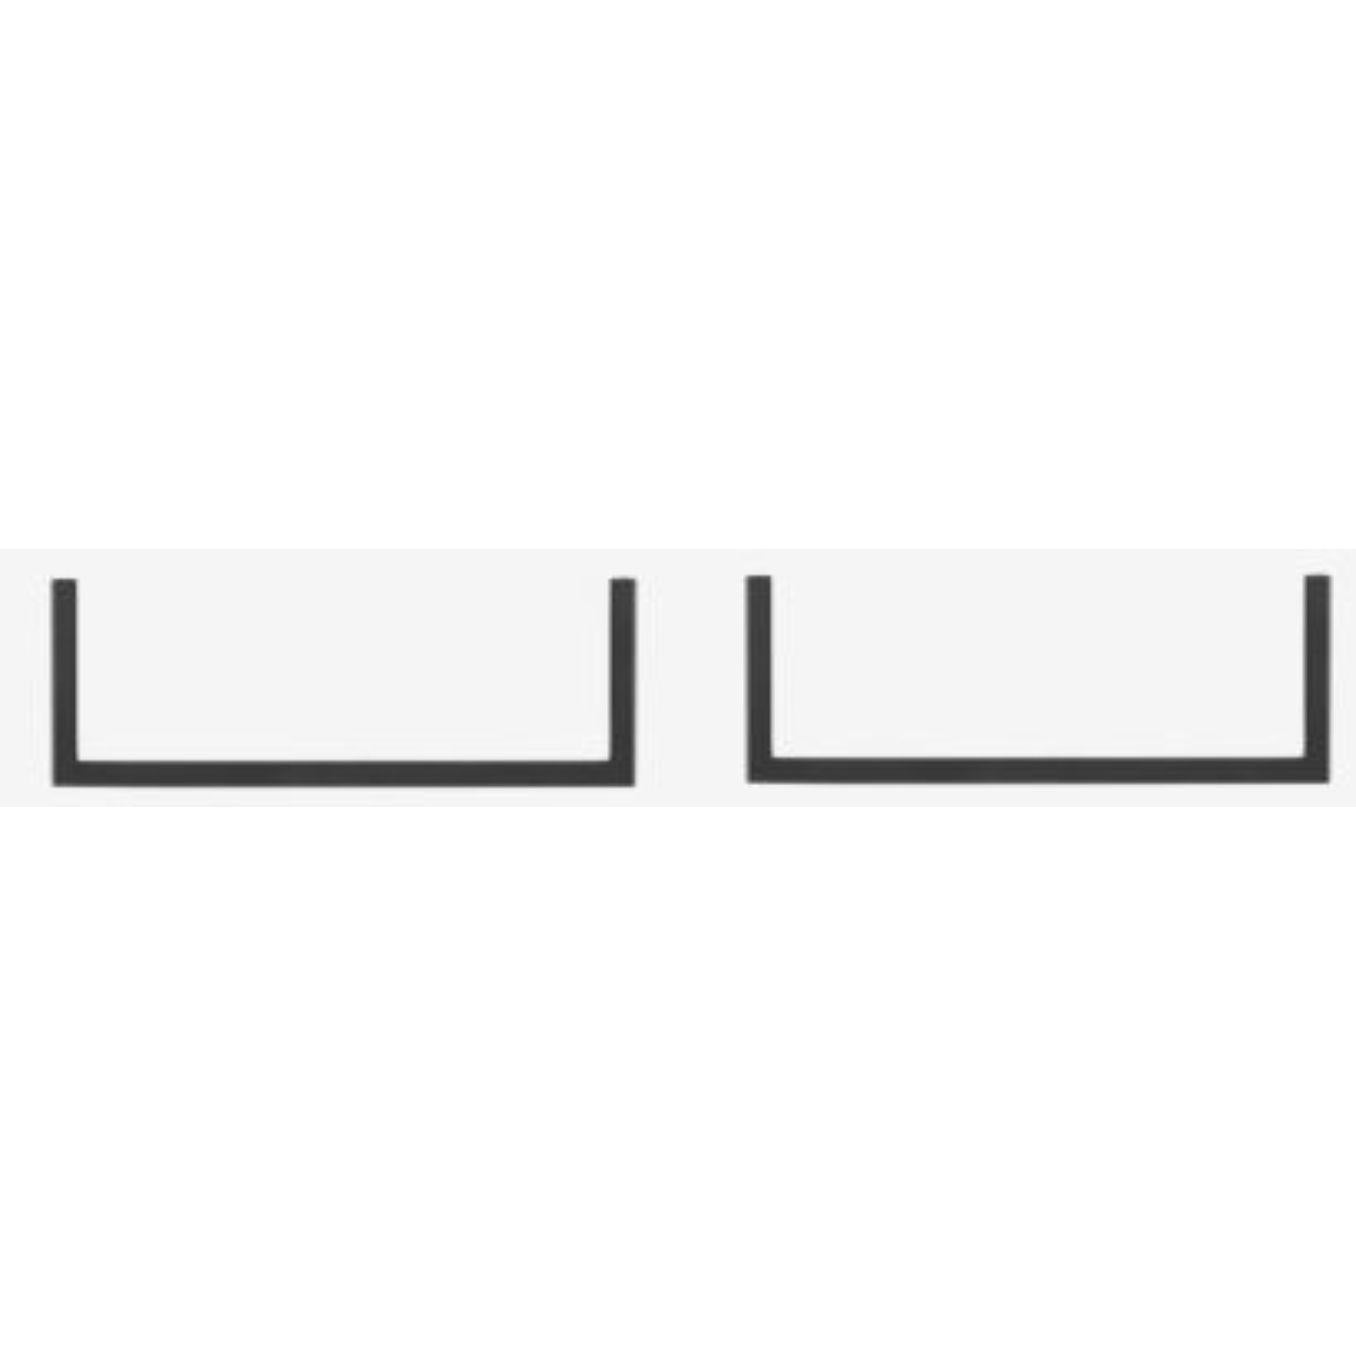 Set of 2 frame 35 Rail by Lassen.
Dimensions: W 10 x D 28 x H 12 cm. 
Materials: Metal.
Also available in different dimensions.
Weight: 1 Kg

By Lassen is a Danish design brand focused on iconic designs created by Mogens and Flemming Lassen,